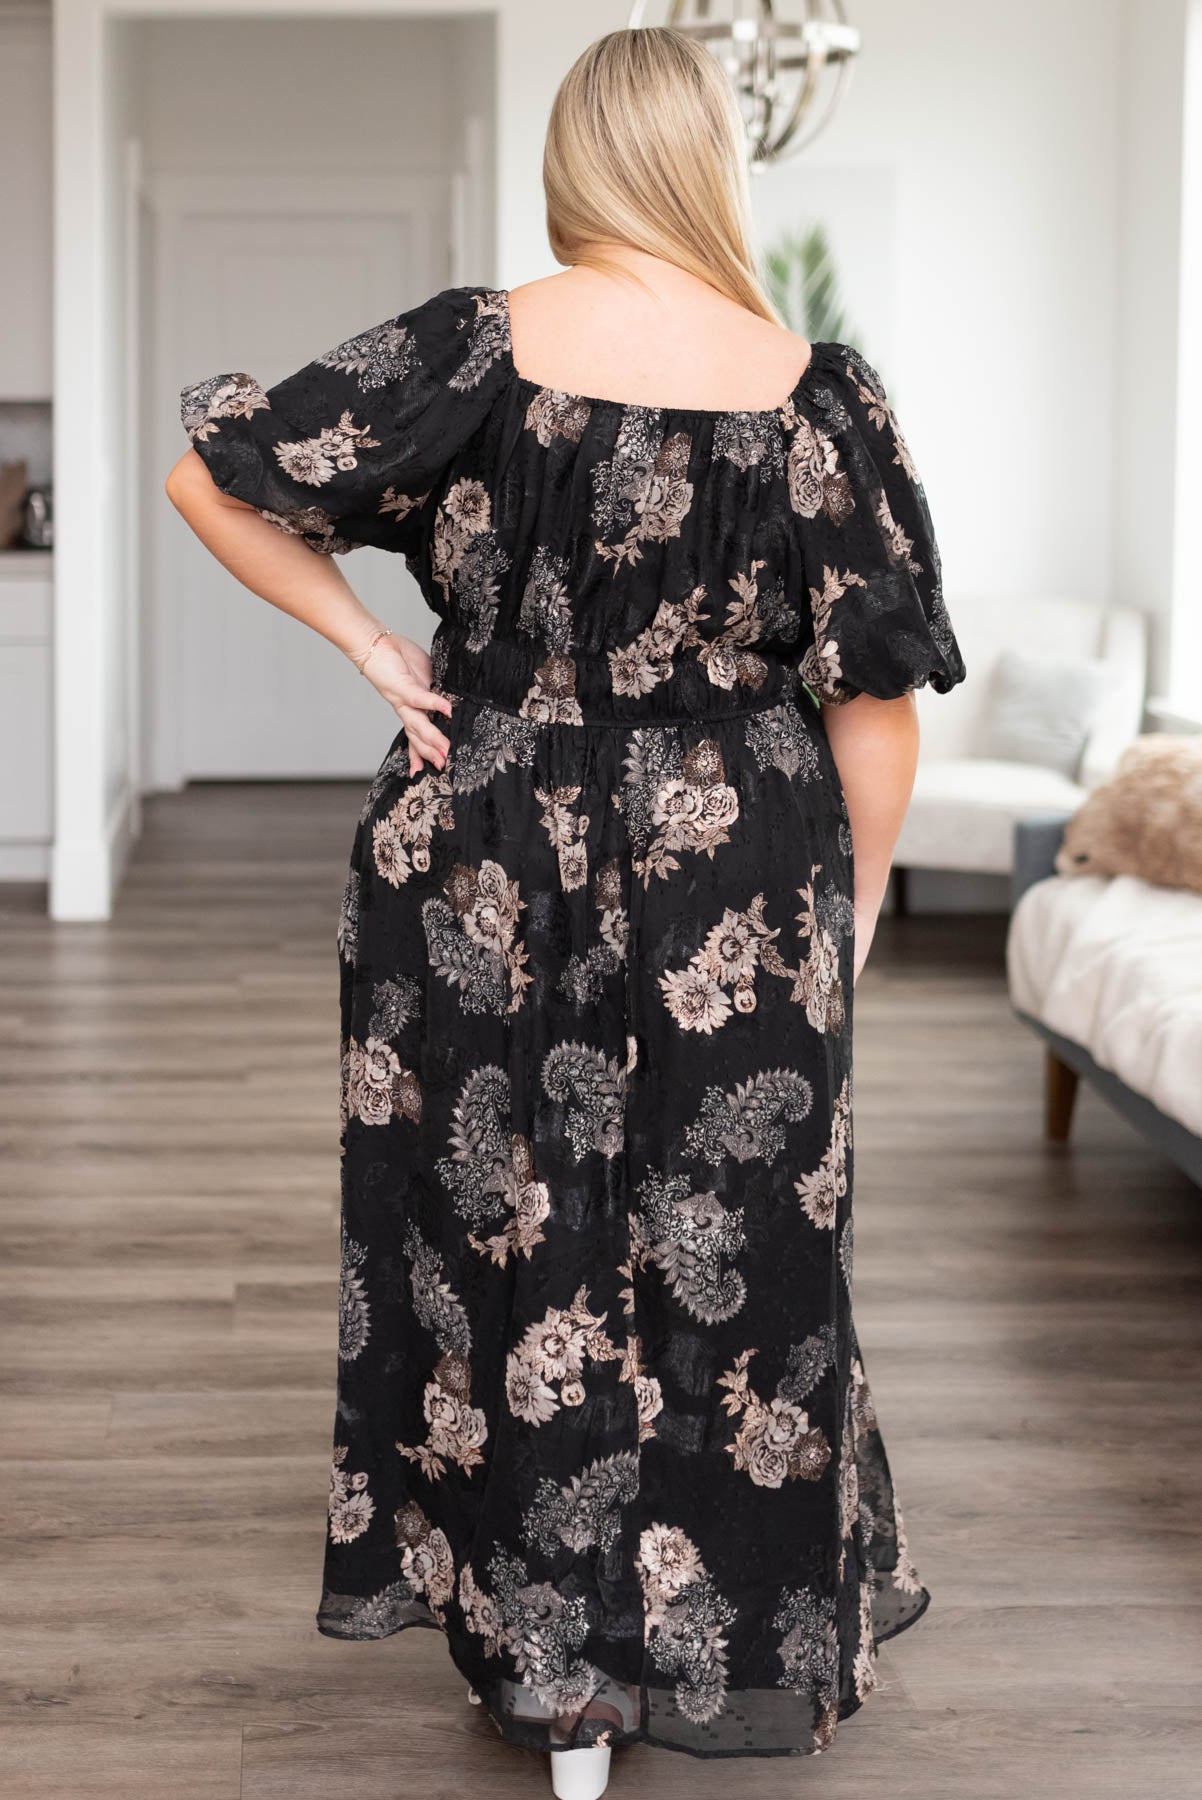 Back view of the a plus size black pattern dress